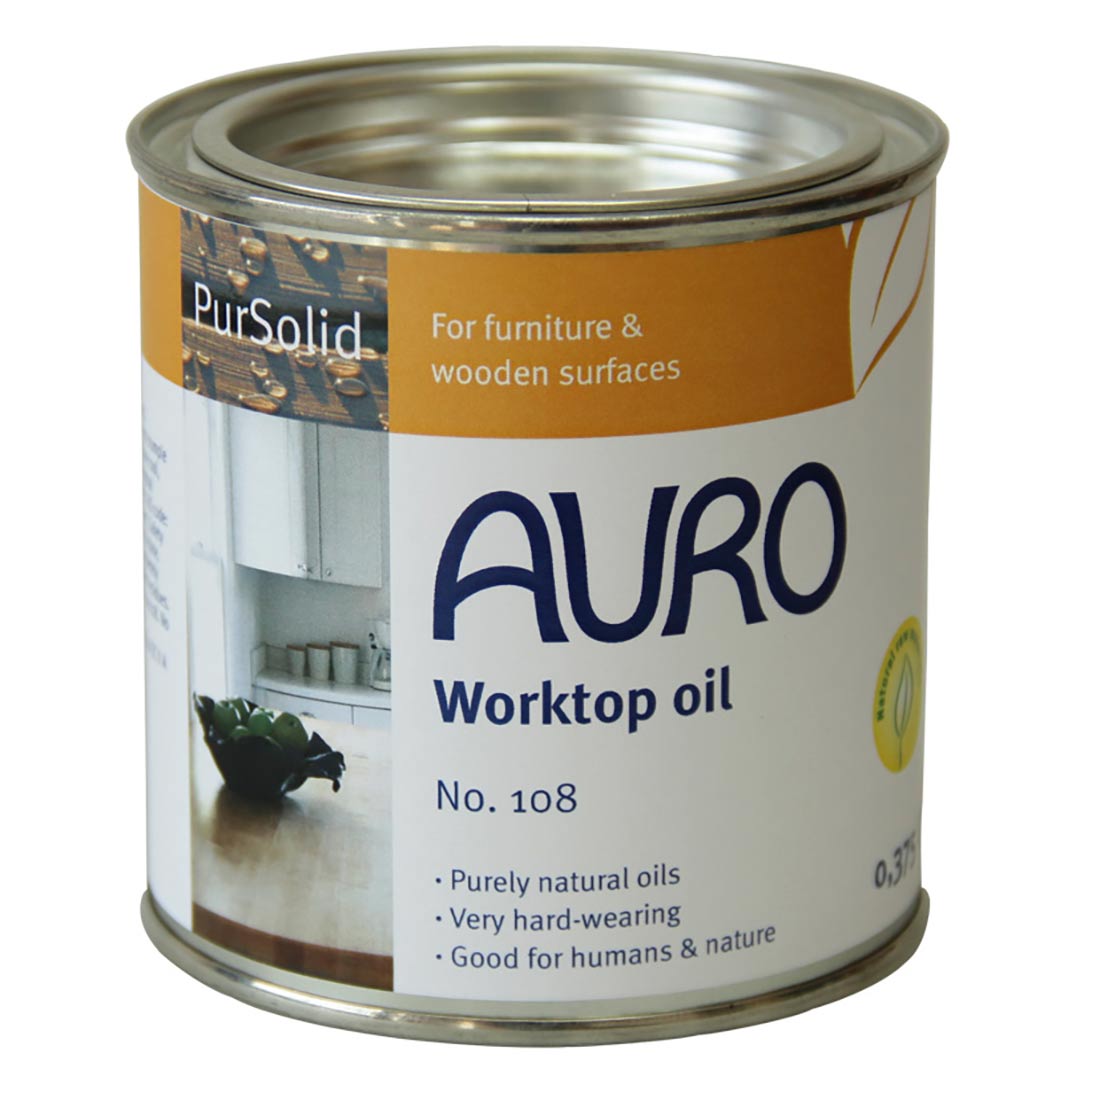 Natural Worktop Oil for Kitchens and Furniture - Auro 108